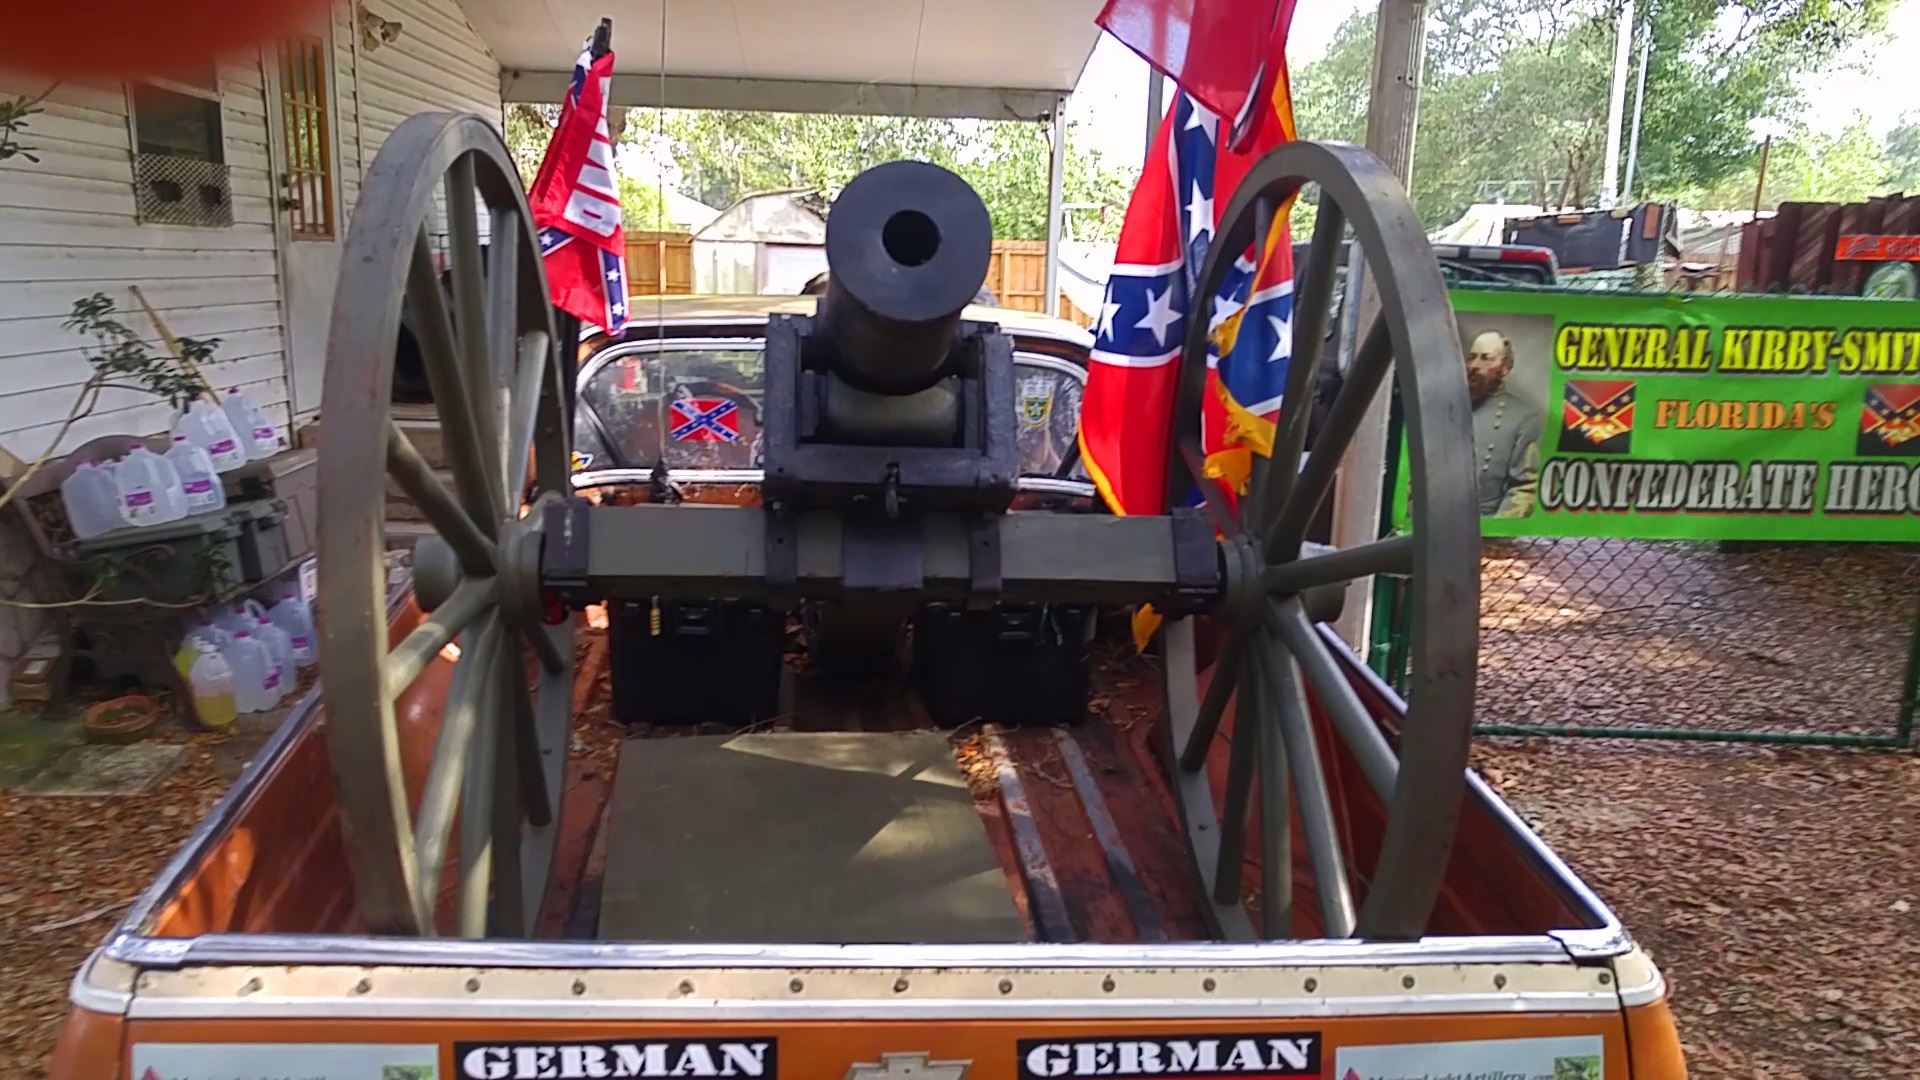 German and Confederate Flags and Cannon